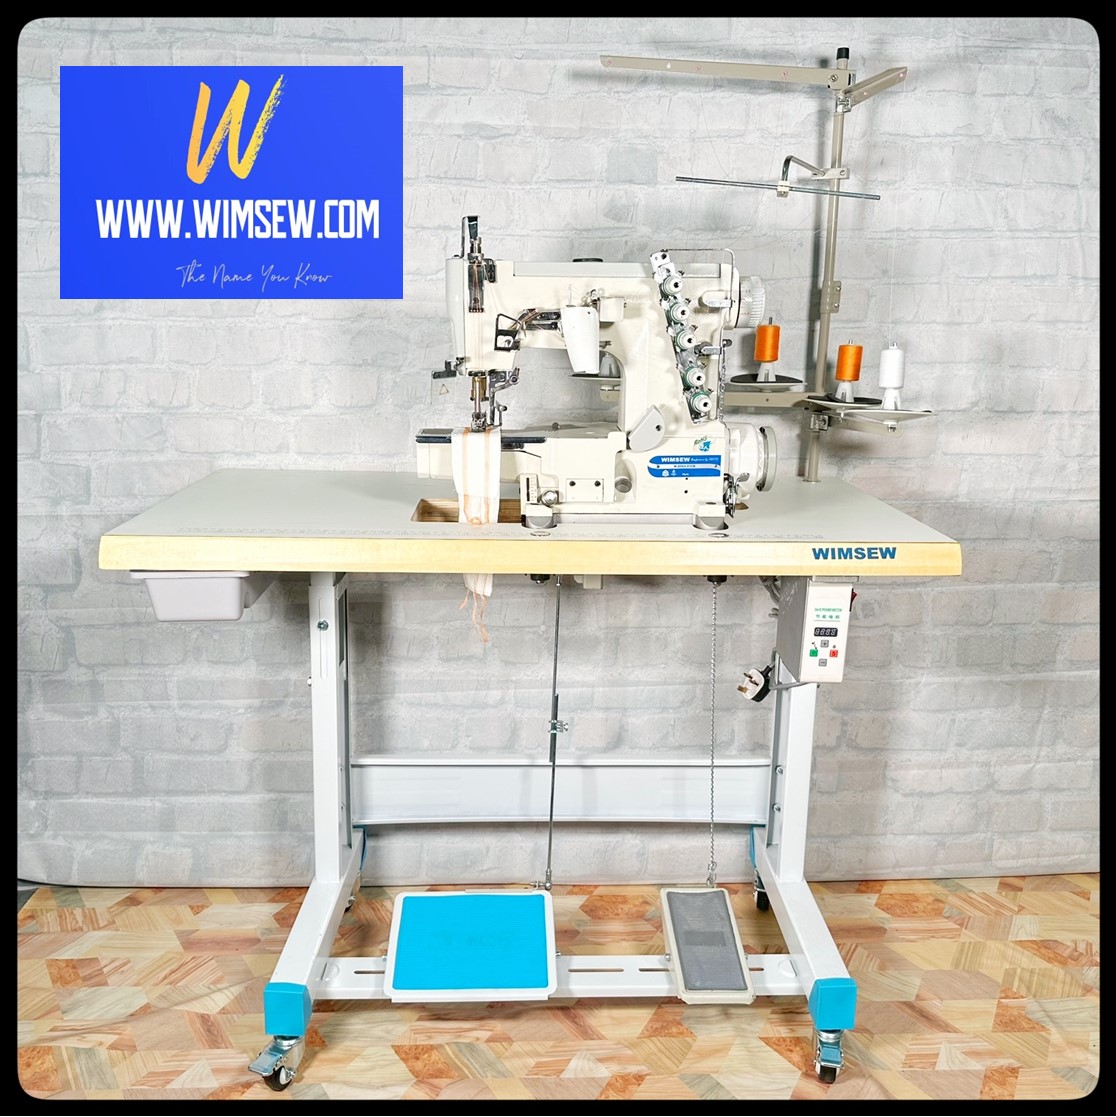 WIMSEW D664-01CB - Cover Stitch Machine - <span style='color: #ff0000;'>Call now for more information. 020 8767 0036 - choose option 3</span>